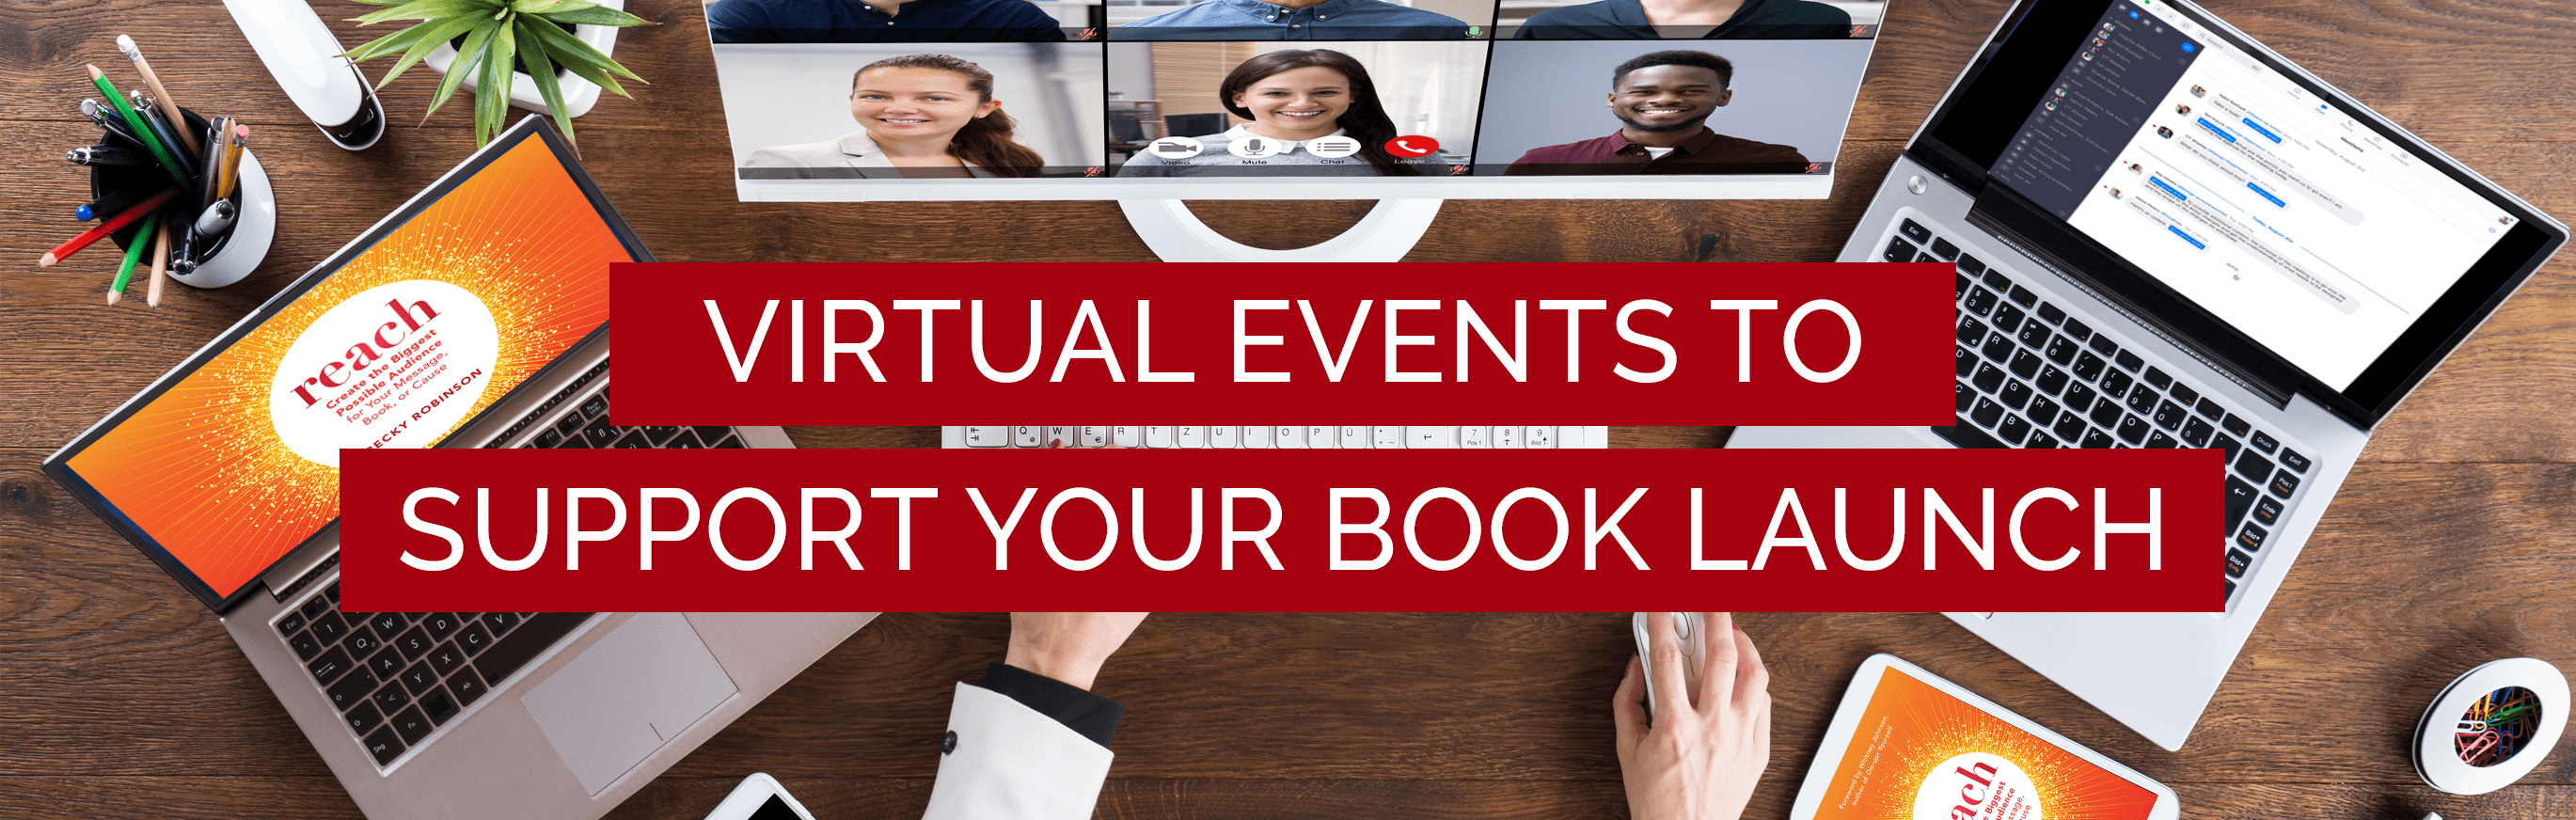 virtual_events_support_book